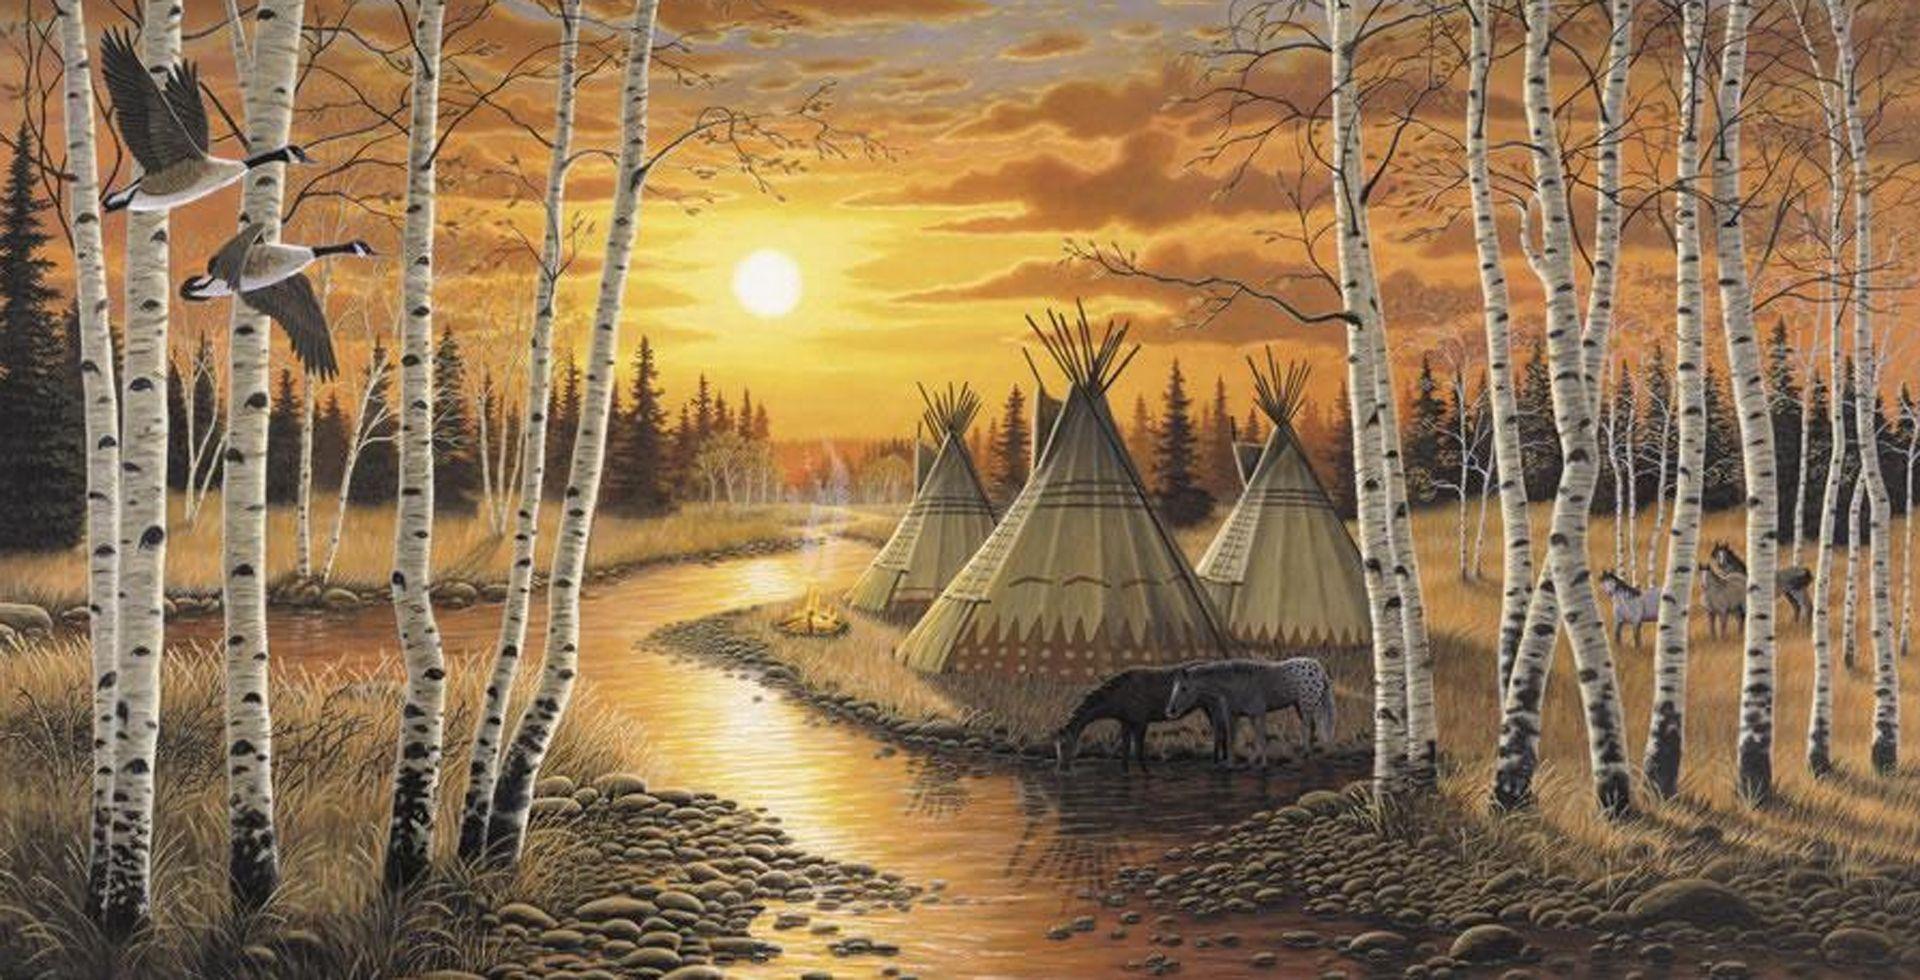 Native American Picturesque Wallpapers, Native American Landscape Artists